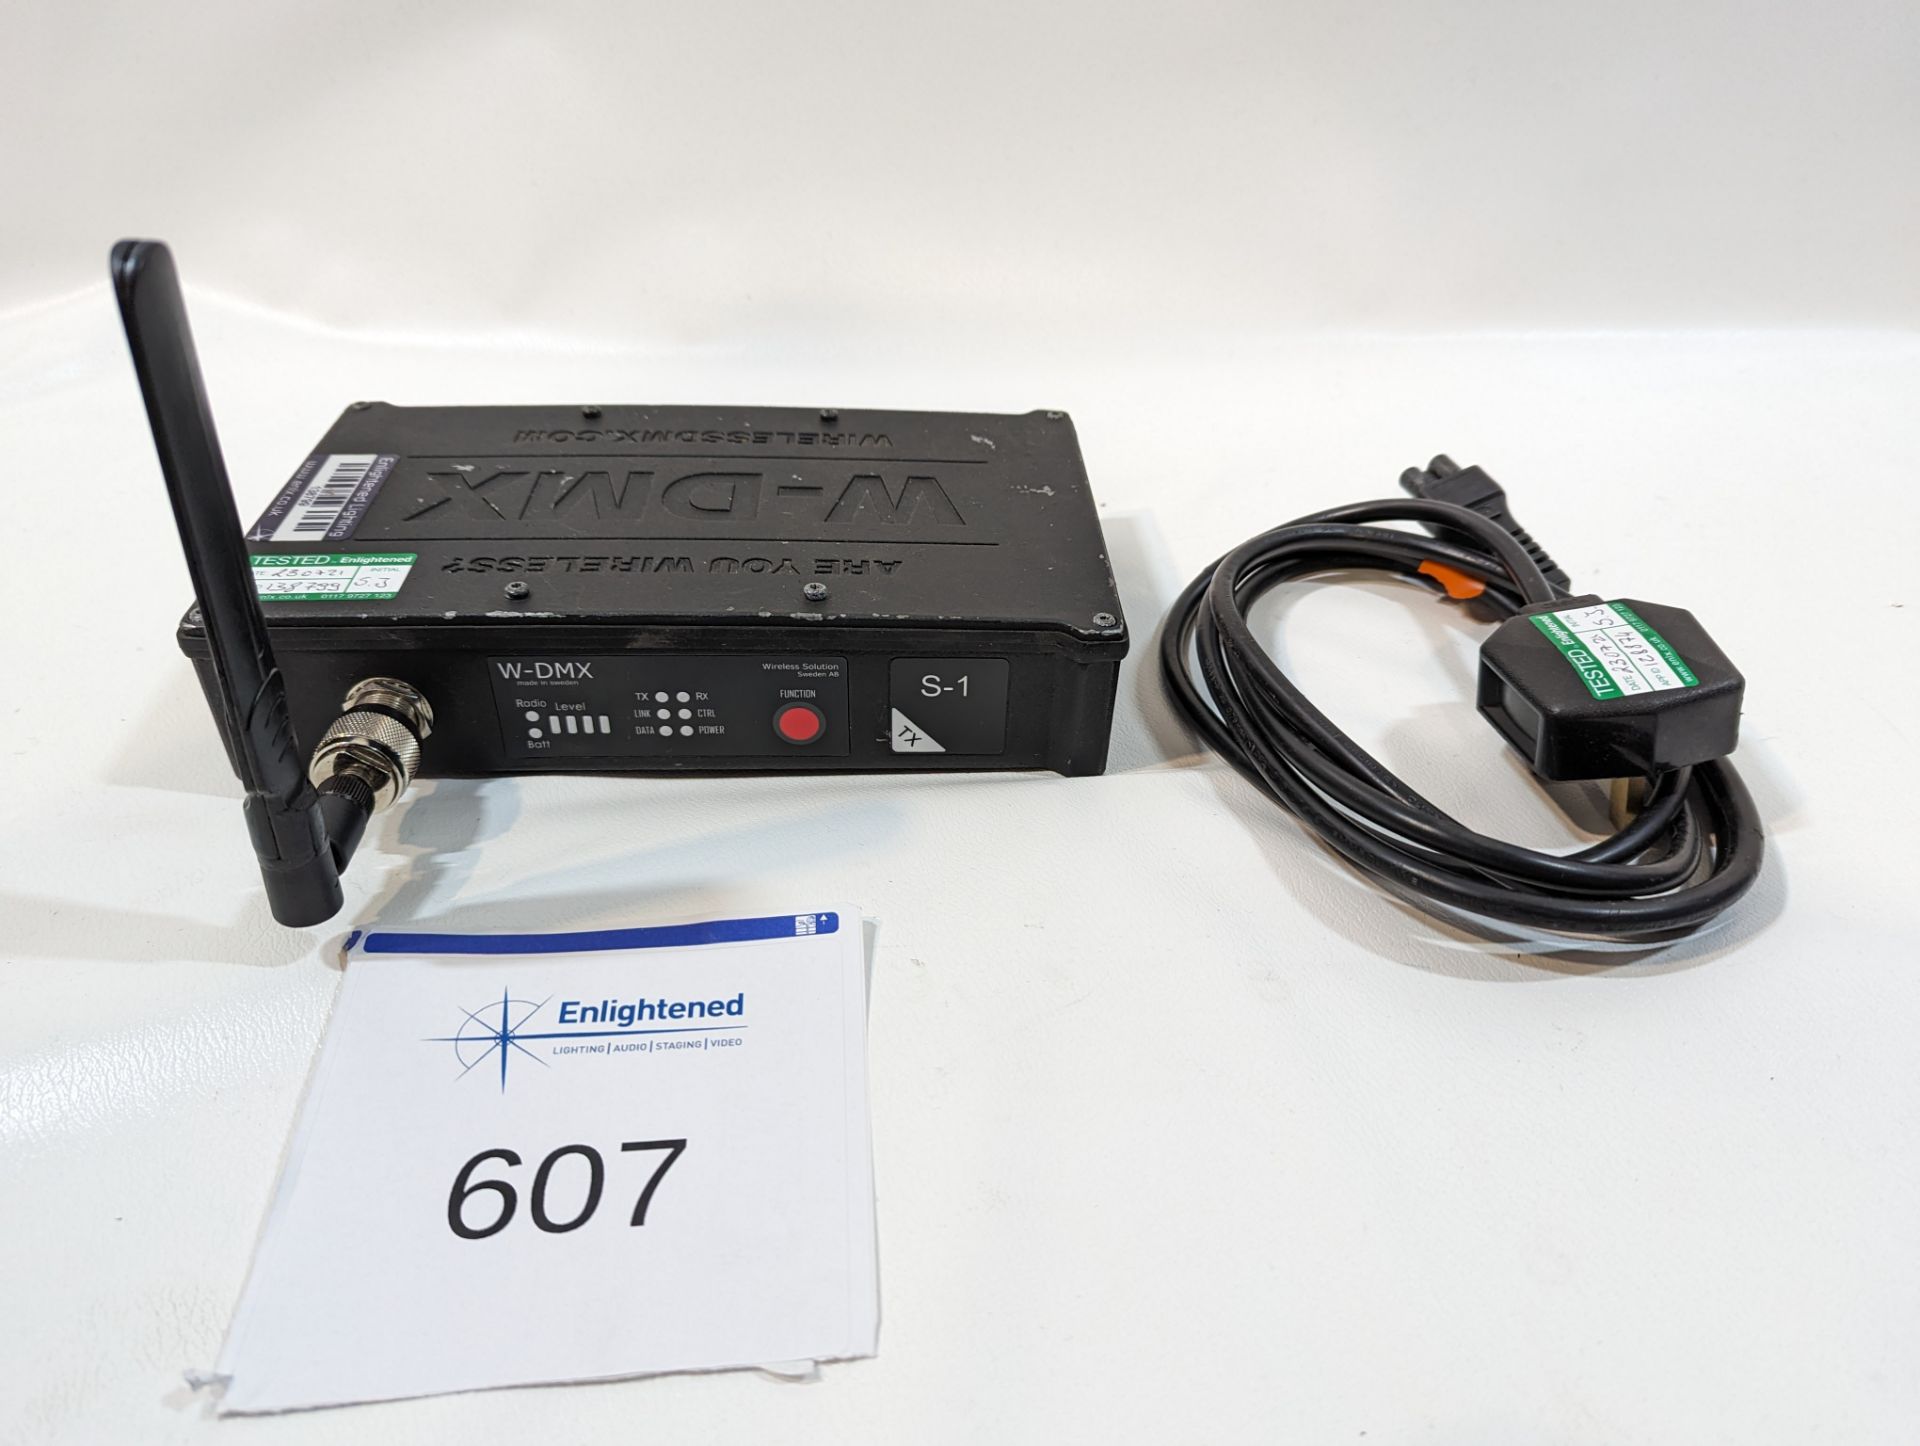 Wireless Solutions S-1 G3 WDMX TX - Image 2 of 5